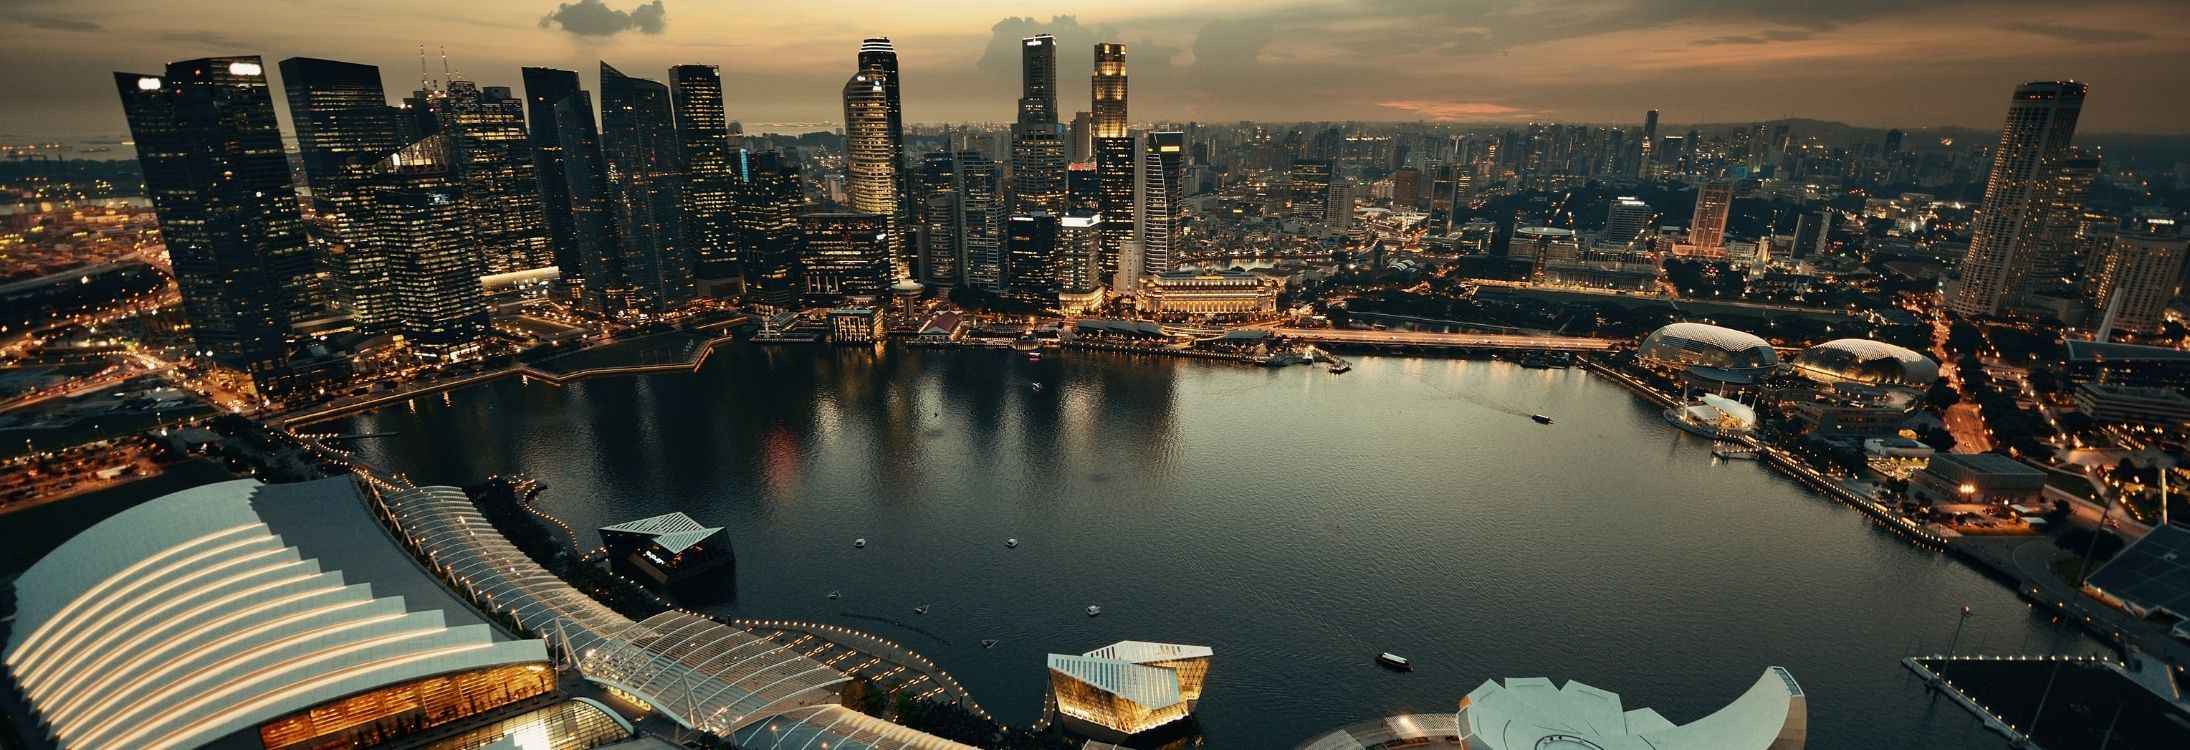 9 Things you DON'T want to do while in Singapore!